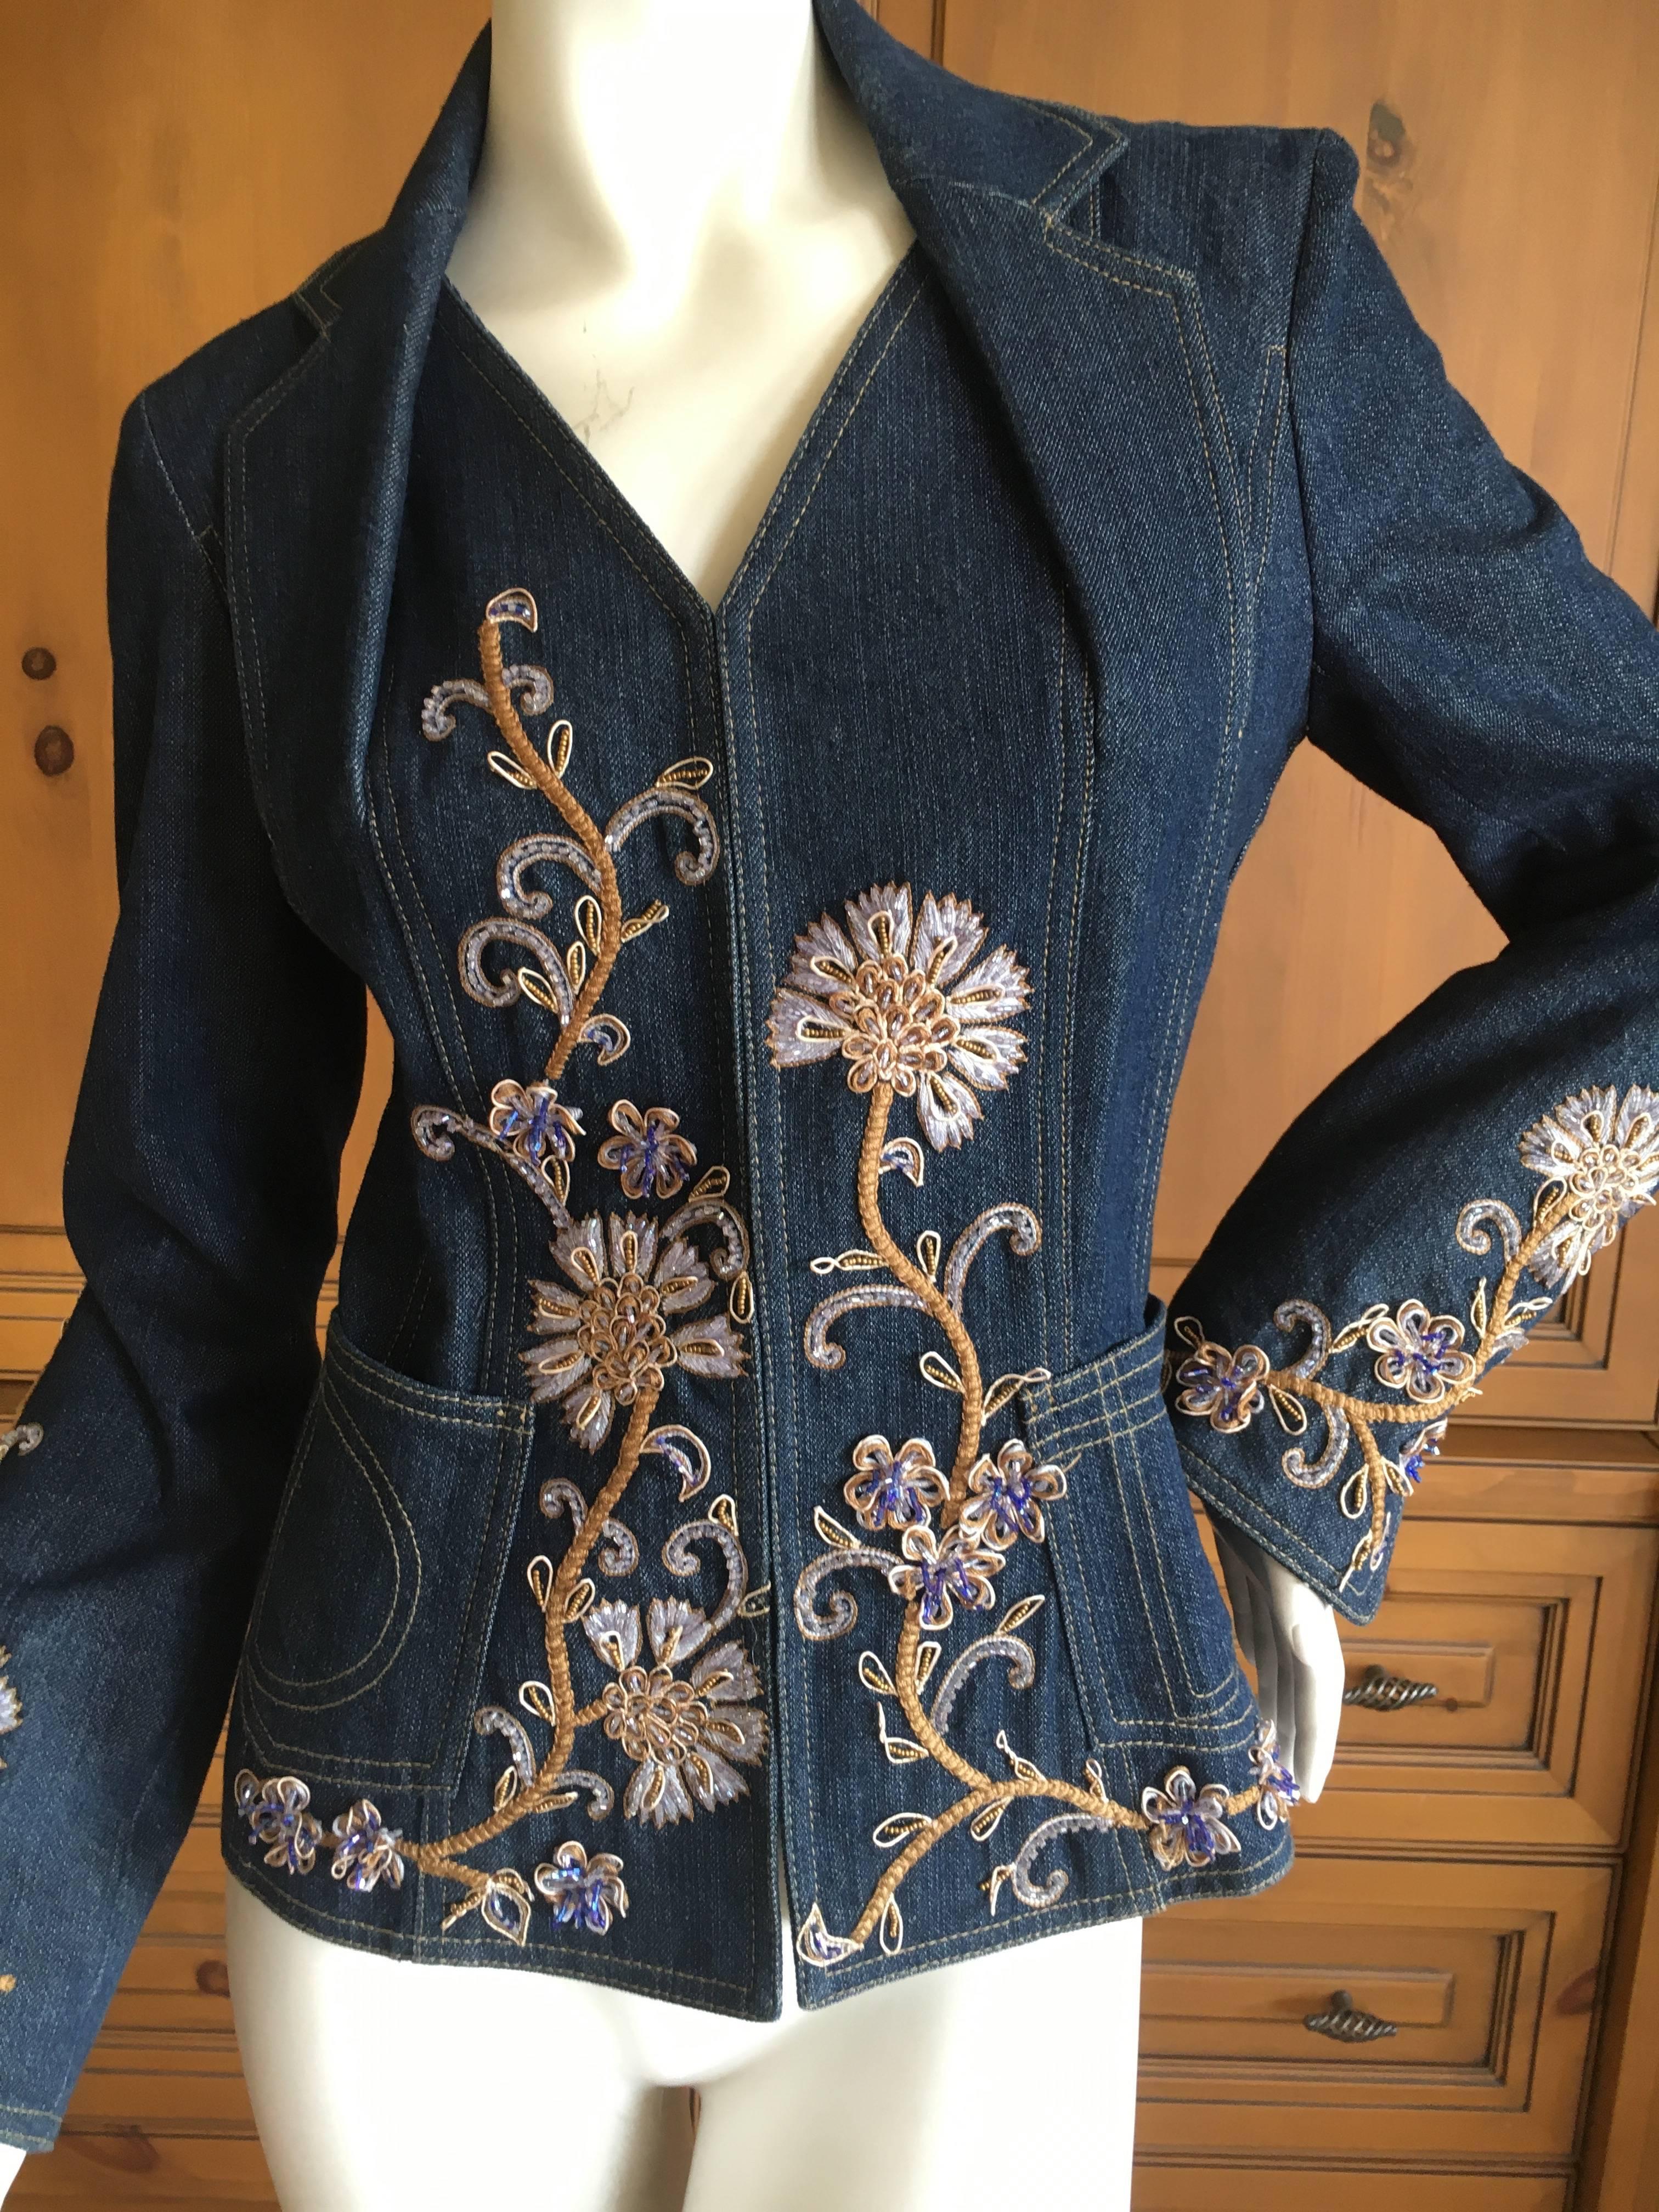 Christian Dior by John Galliano Vintage Floral Embellished Denim Bar Jacket .
So chic, with bold D on pockets and heart on back.
 Size 36 
Bust 36